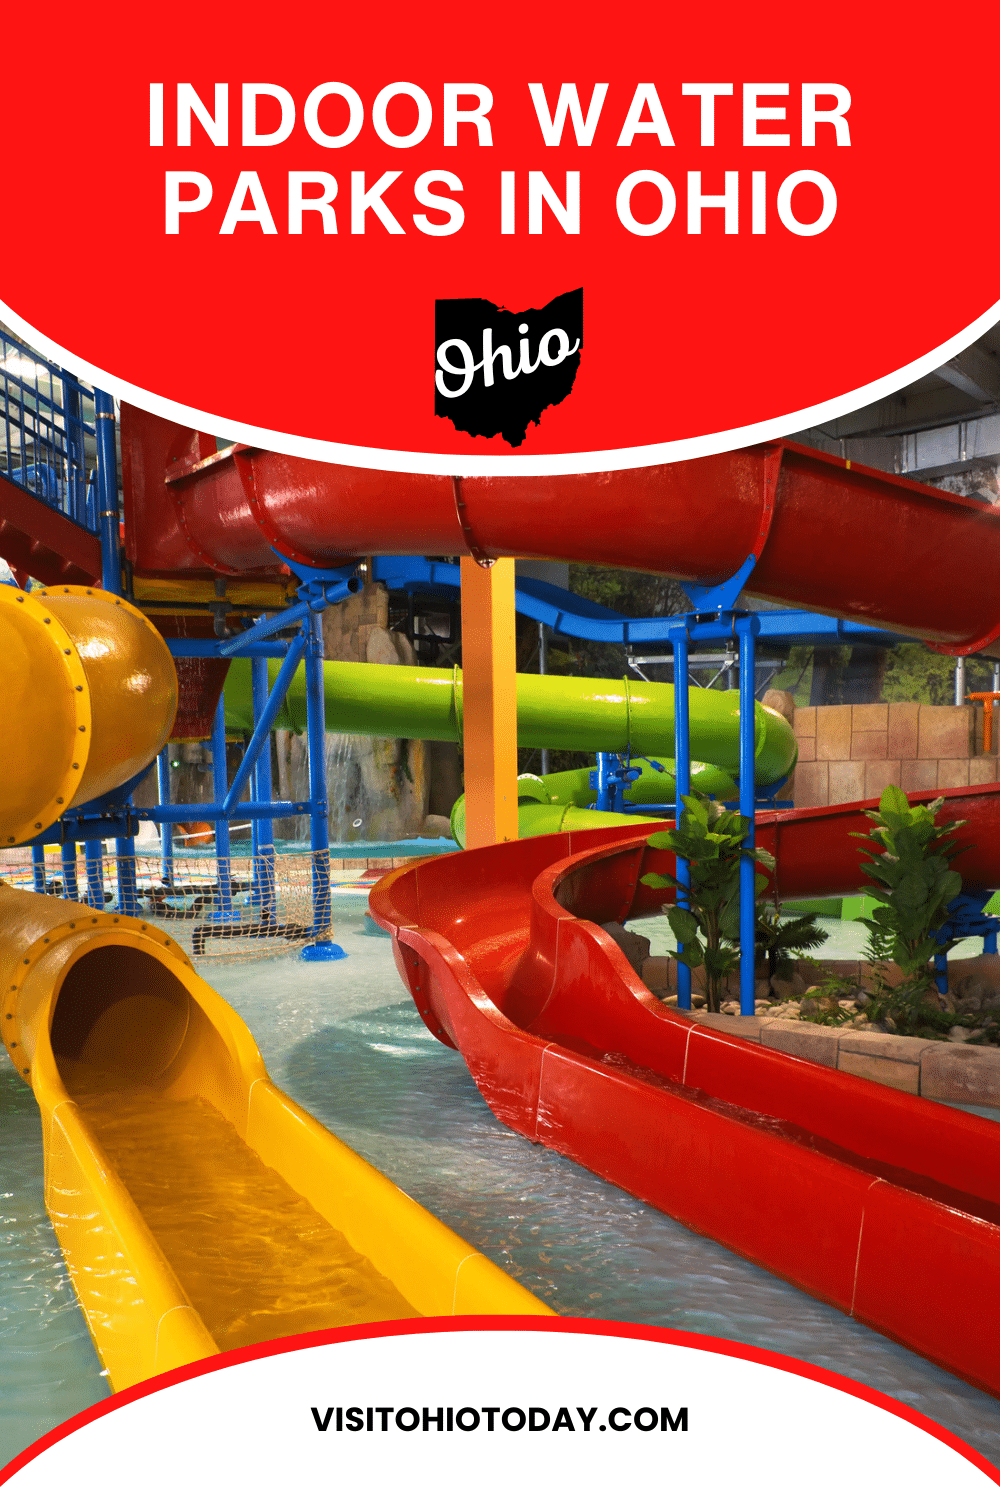 Ohio is blessed with some terrific Indoor Water Parks. Each Water Park has something a little different to offer and in this article we are featuring 10 of the best Indoor Water Parks in Ohio.